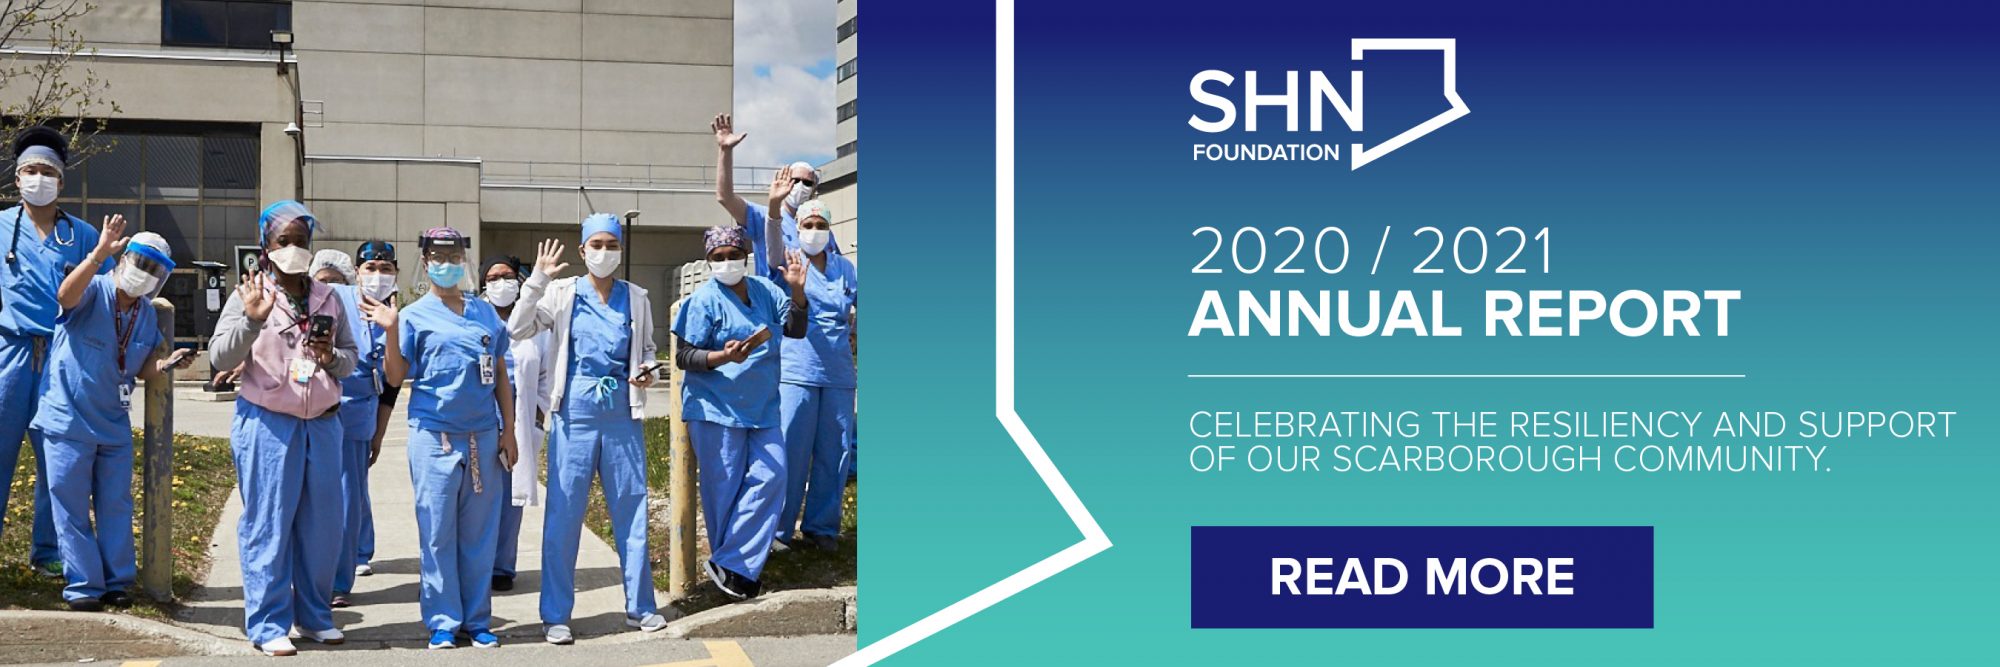 SHN 2020/2021 Annual Report: Celebrating the resiliency and support of our Scarborough community.